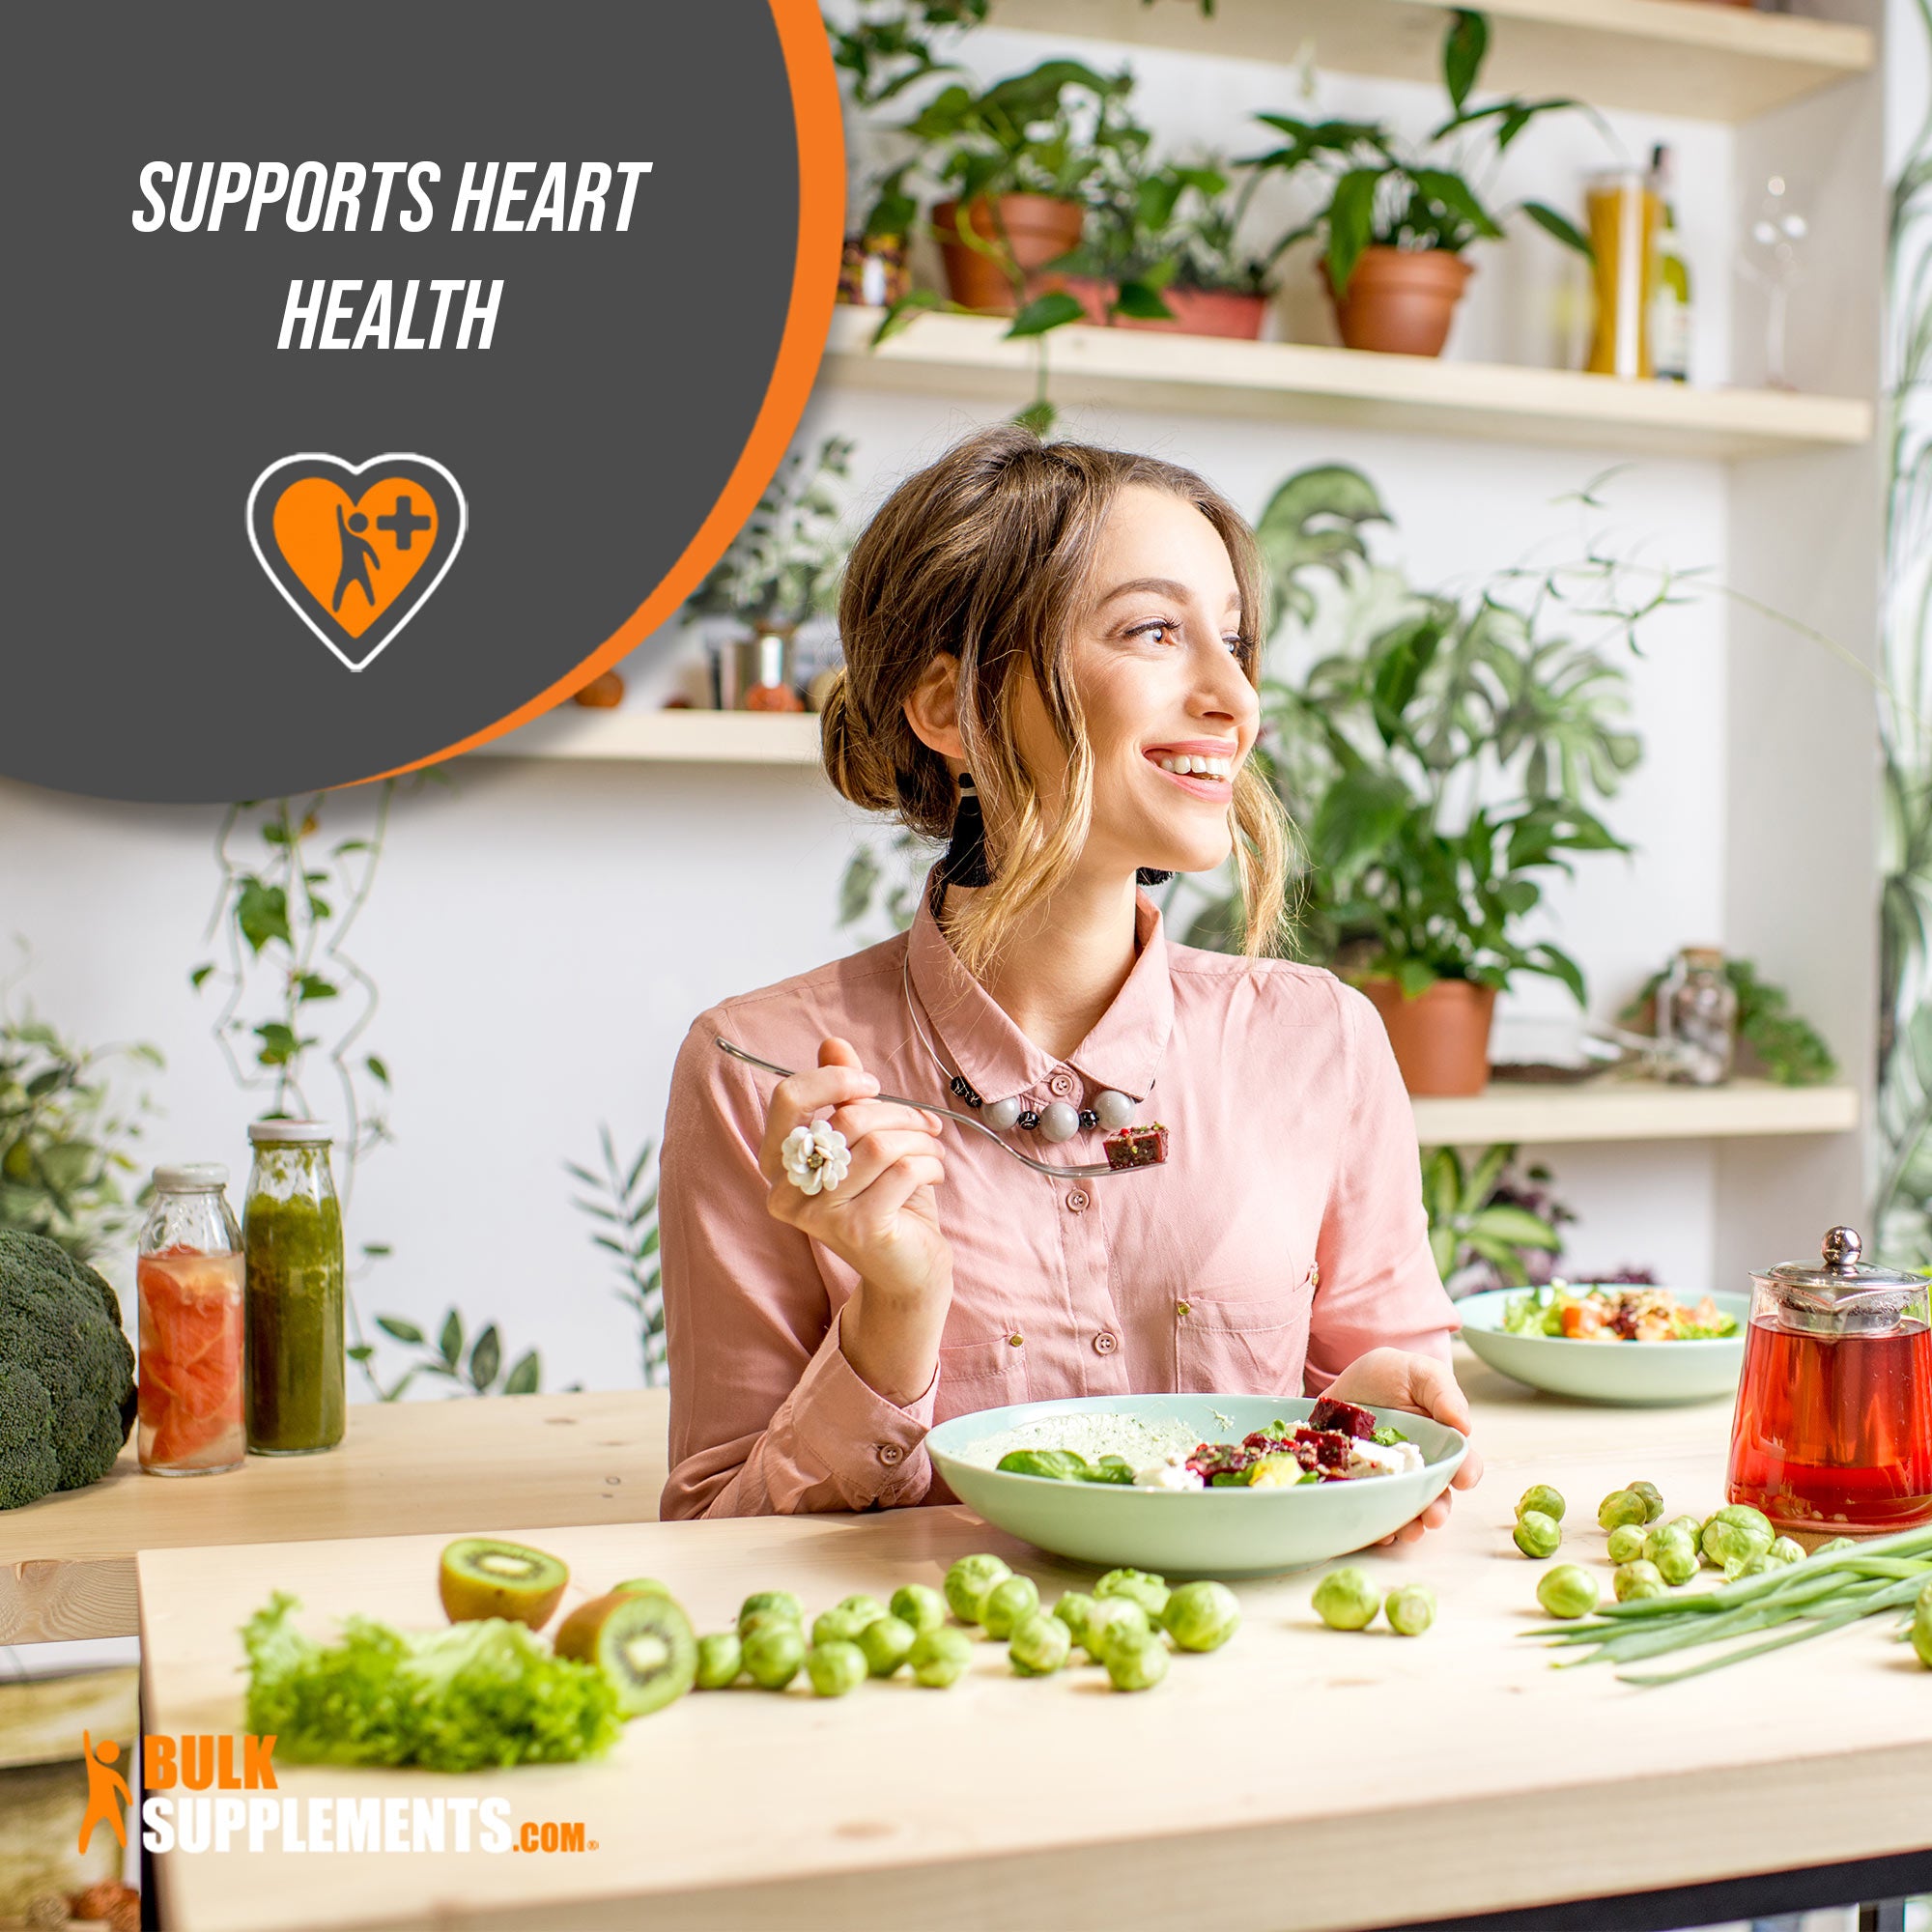 Watercress Extract Supports Heart Health